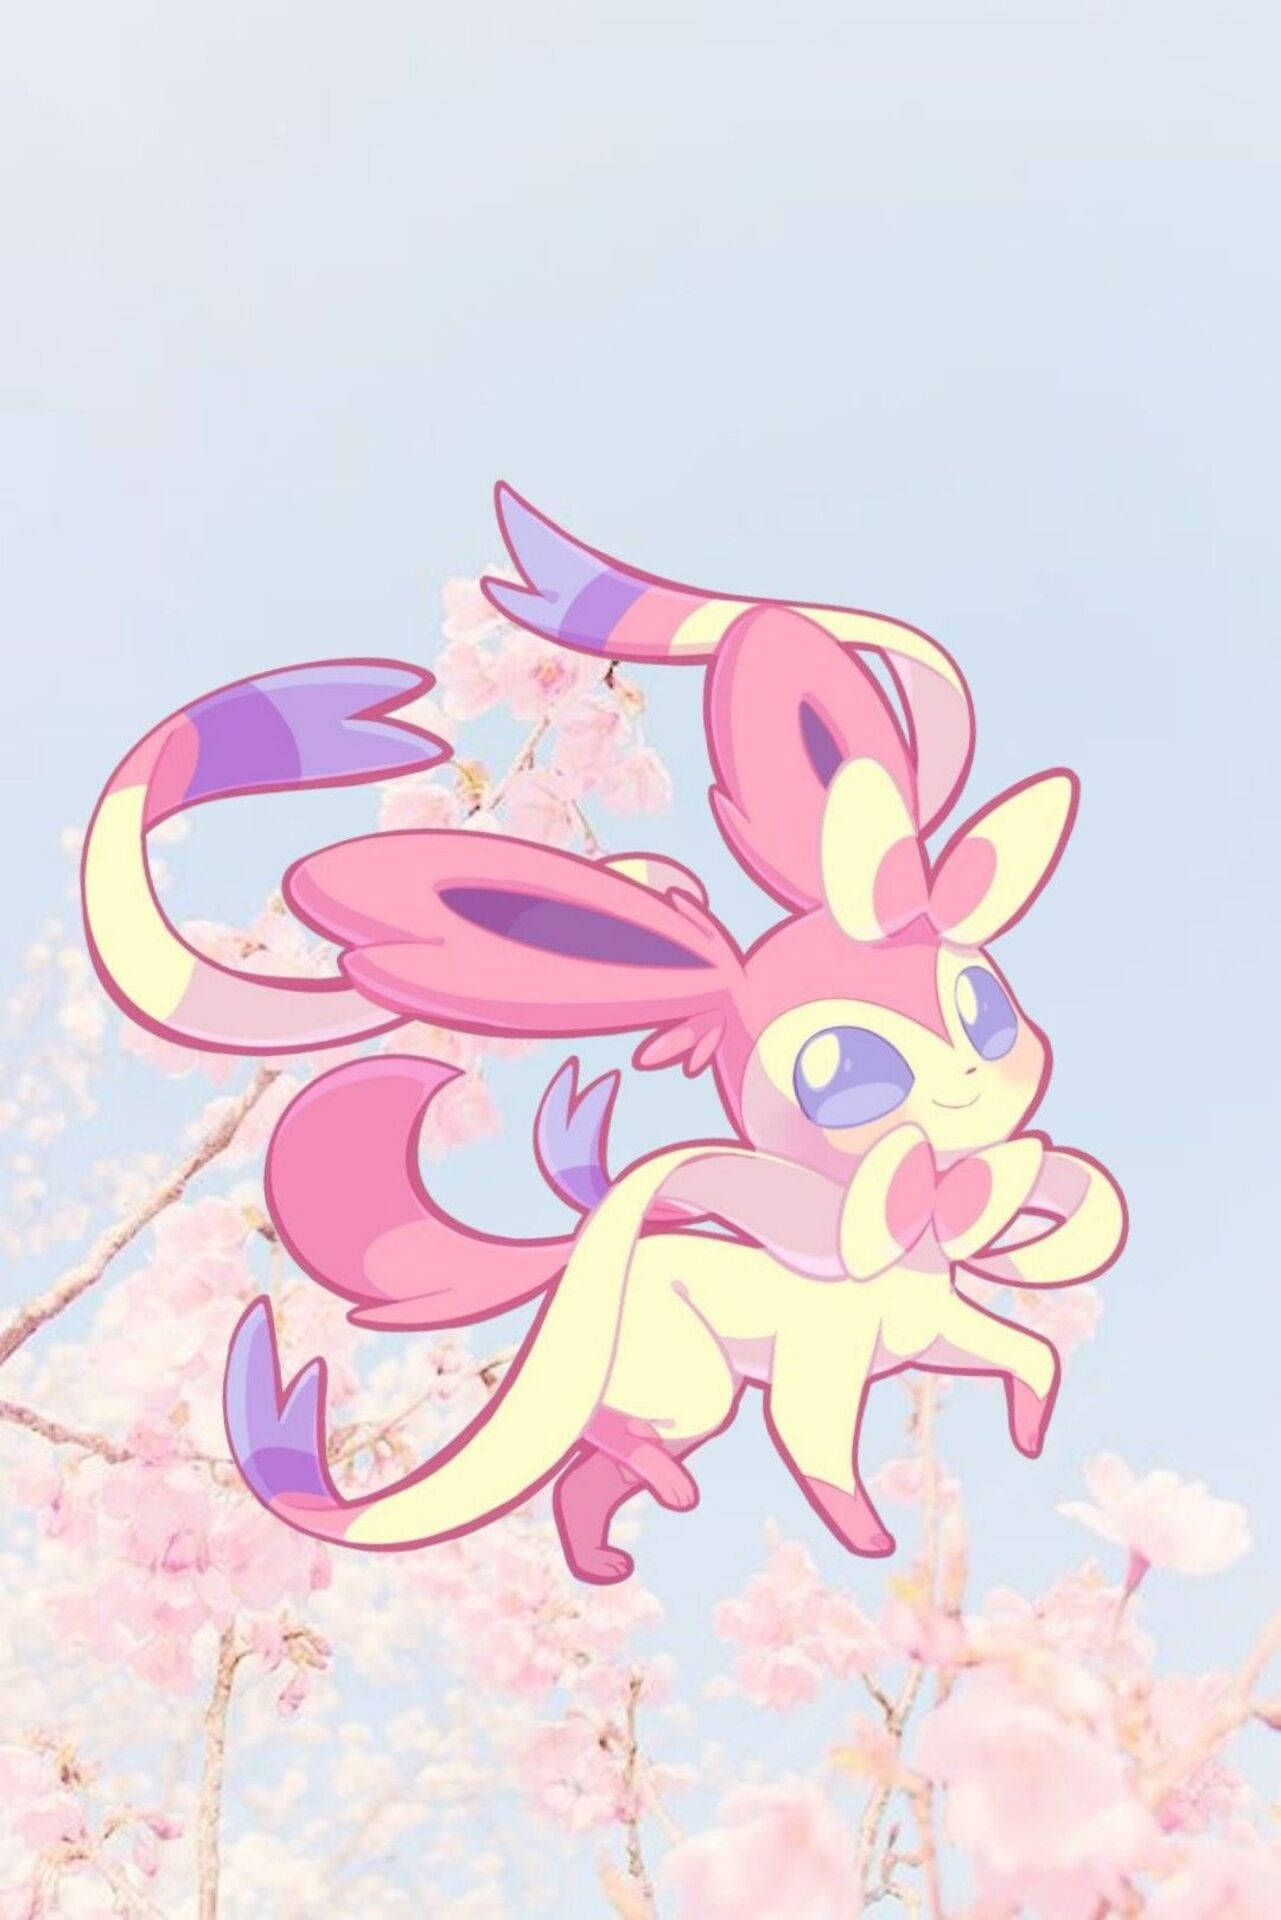 A Sylveon Pokemon Surrounded By A Pink Sakura Phone Background